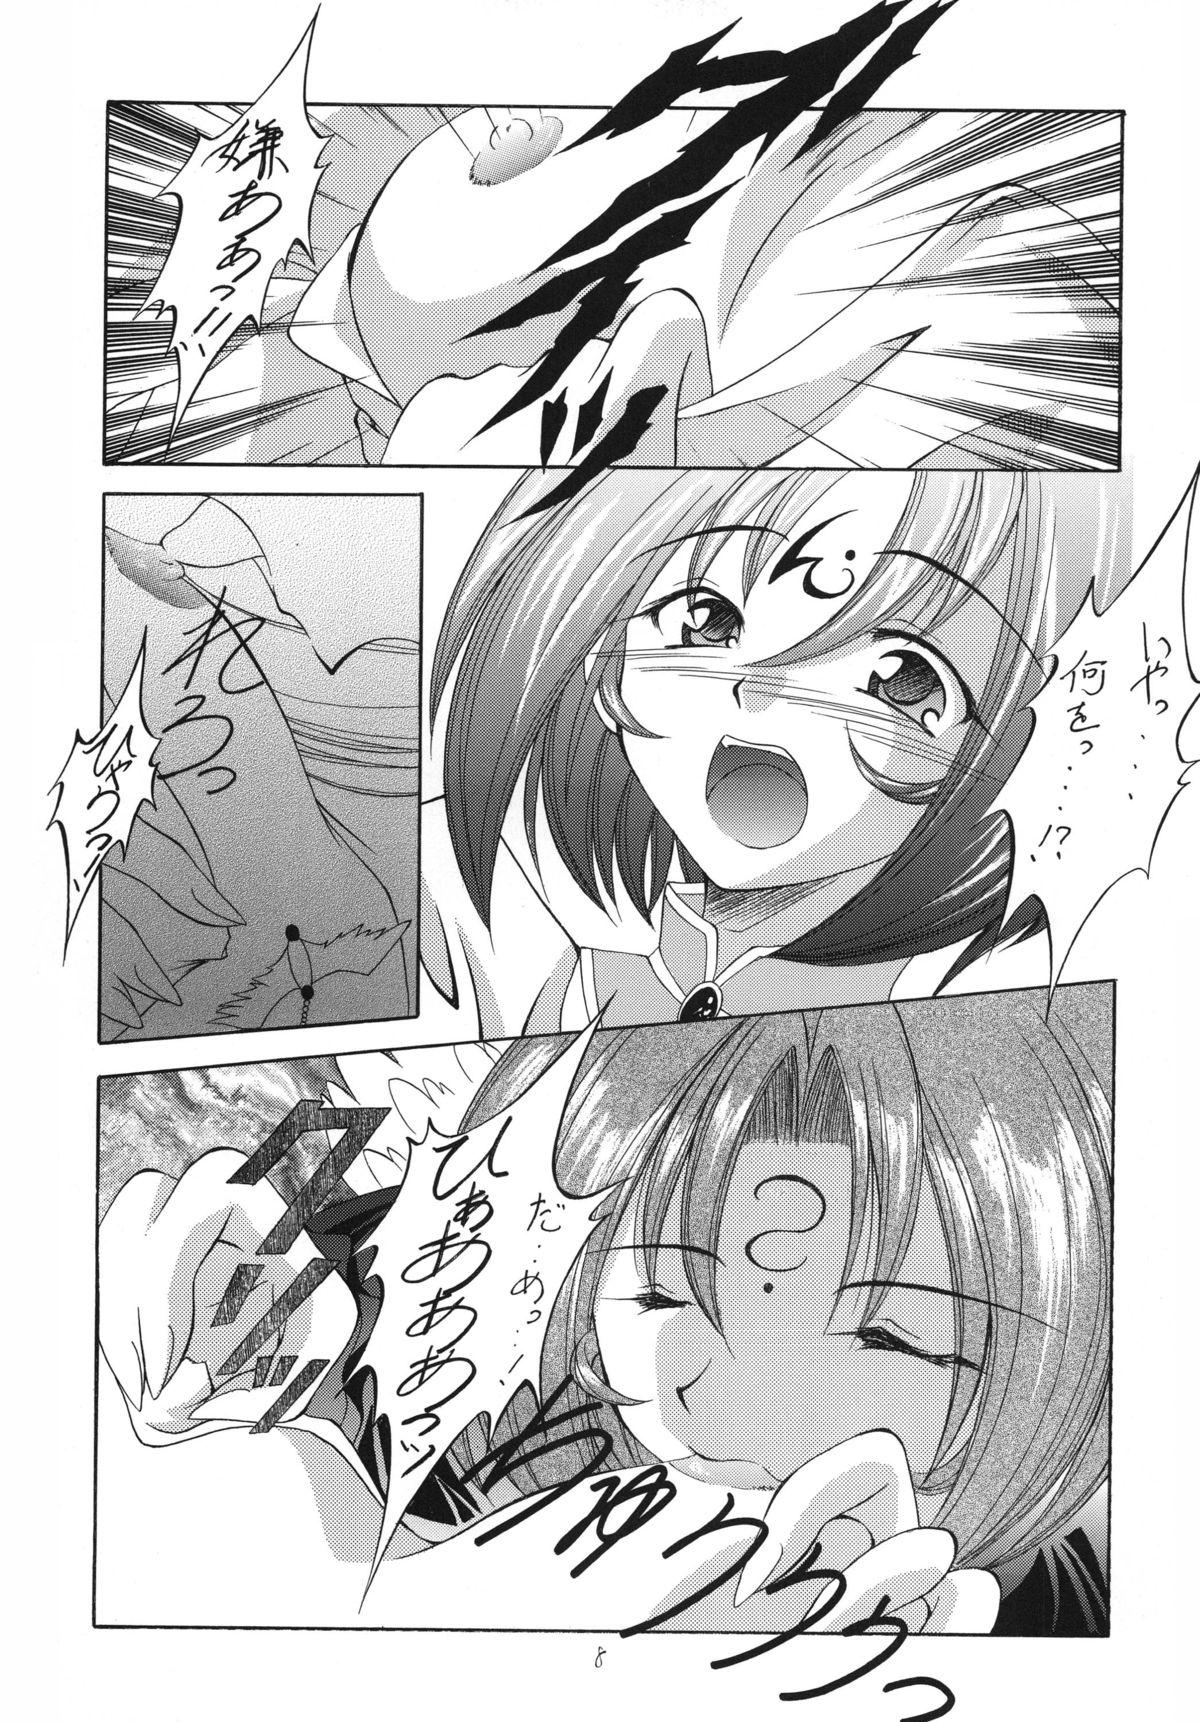 Moms Kyoei to Haitoku - .hacksign Ameteur Porn - Page 8